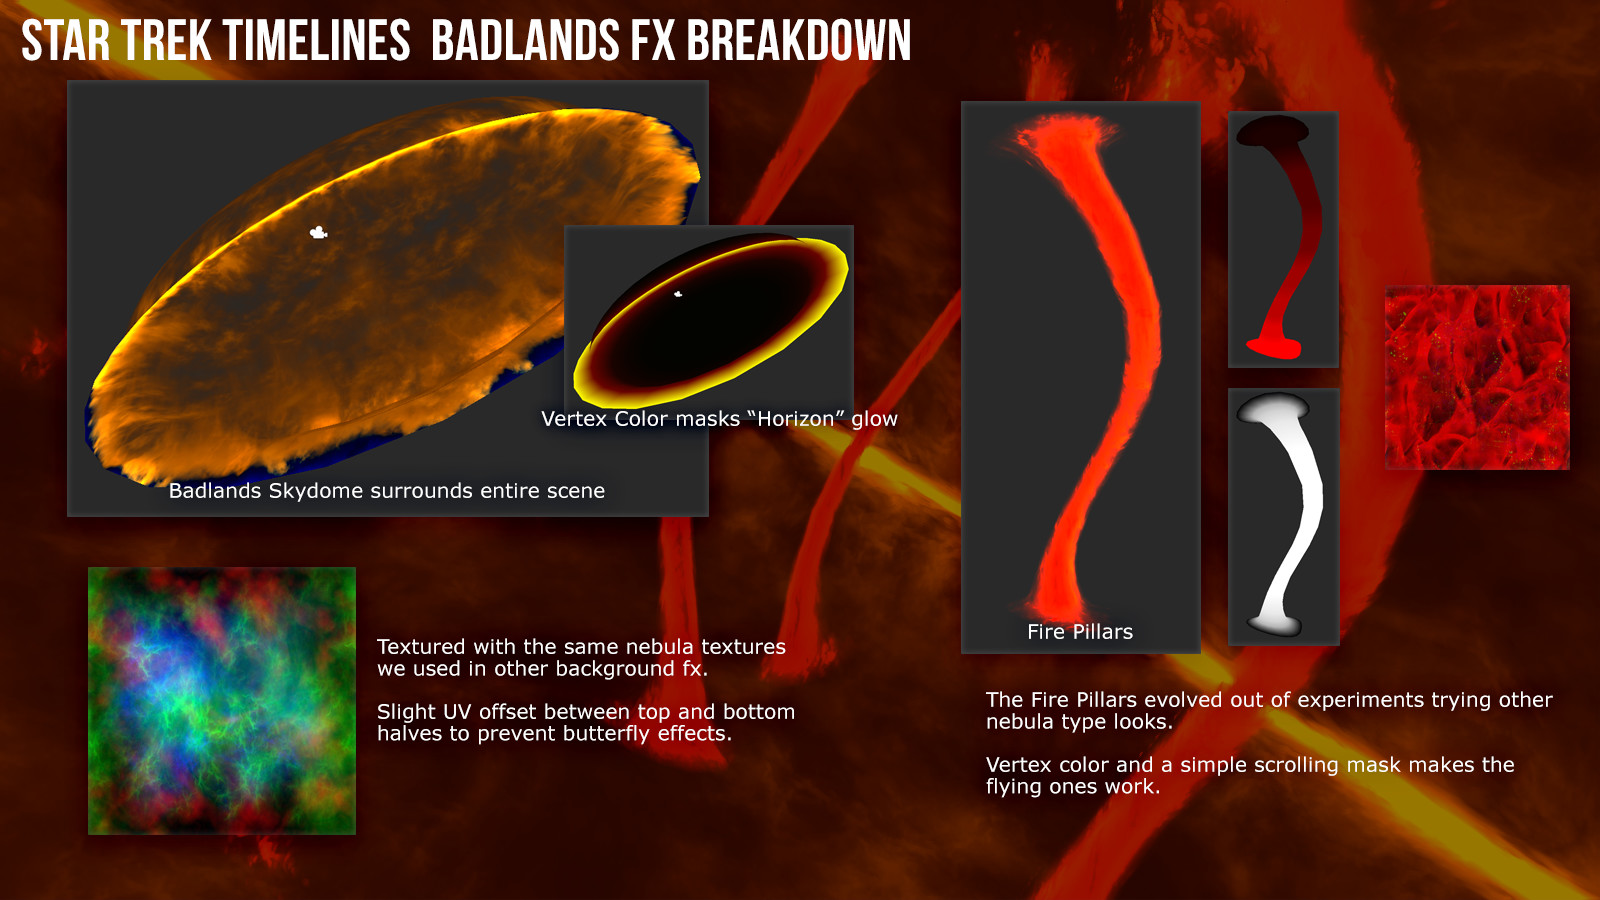 The unique elements of this system boil down to the unique sky "dome" and the plasma-ish fire storm pillars that fly through the system.